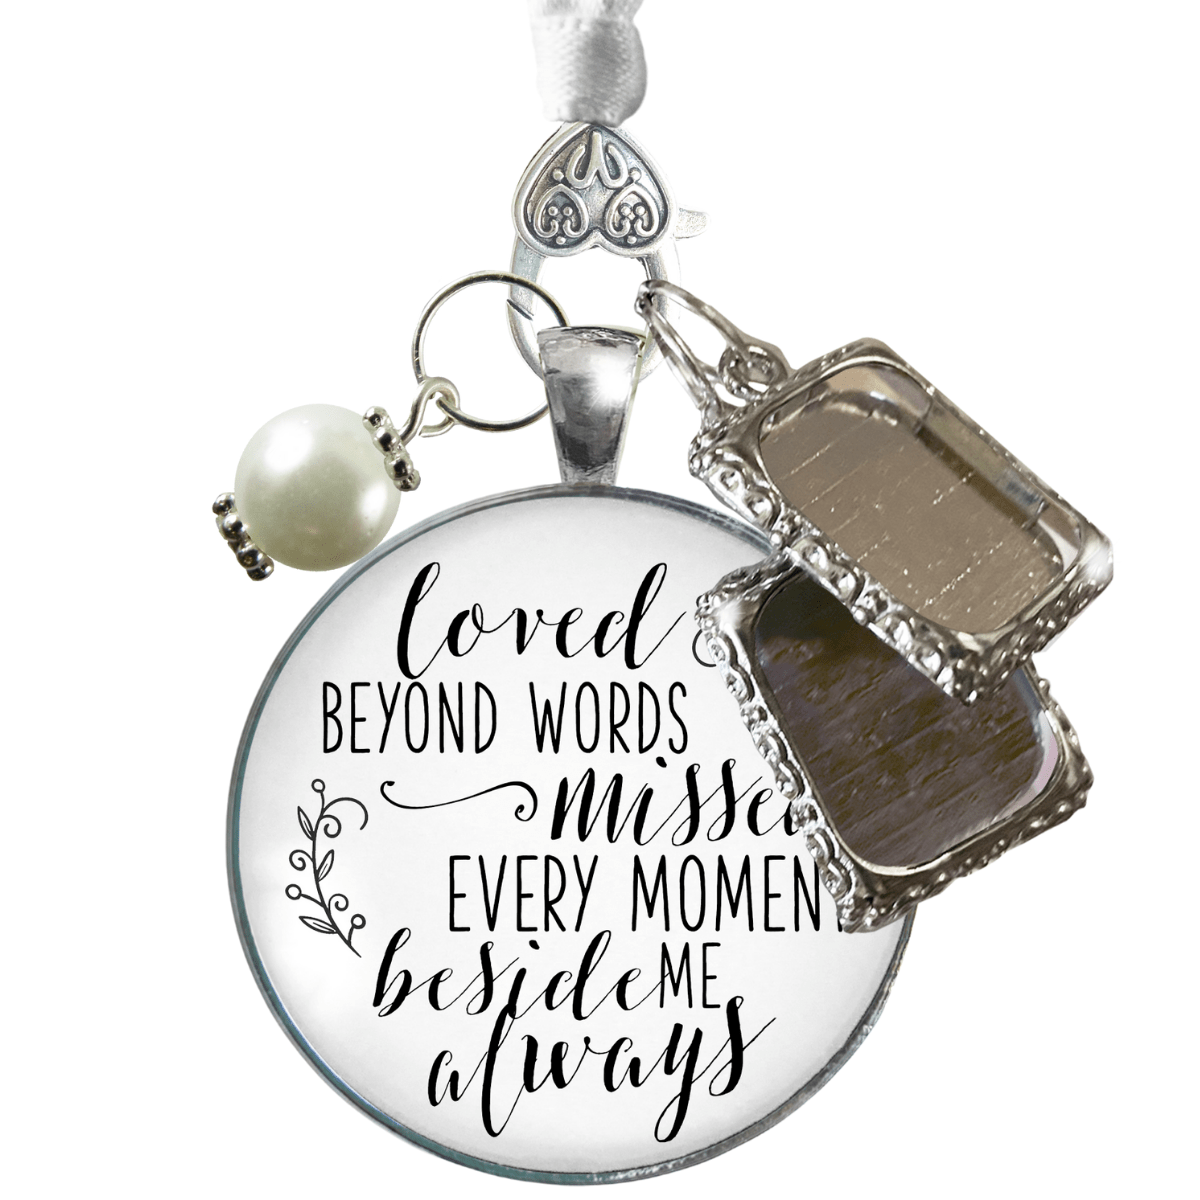 Bouquet Wedding Charm Loved Beyond Words Silver Bridal Memorial Photo Jewelry 2 Frames  Bouquet Charm - Gutsy Goodness Handmade Jewelry